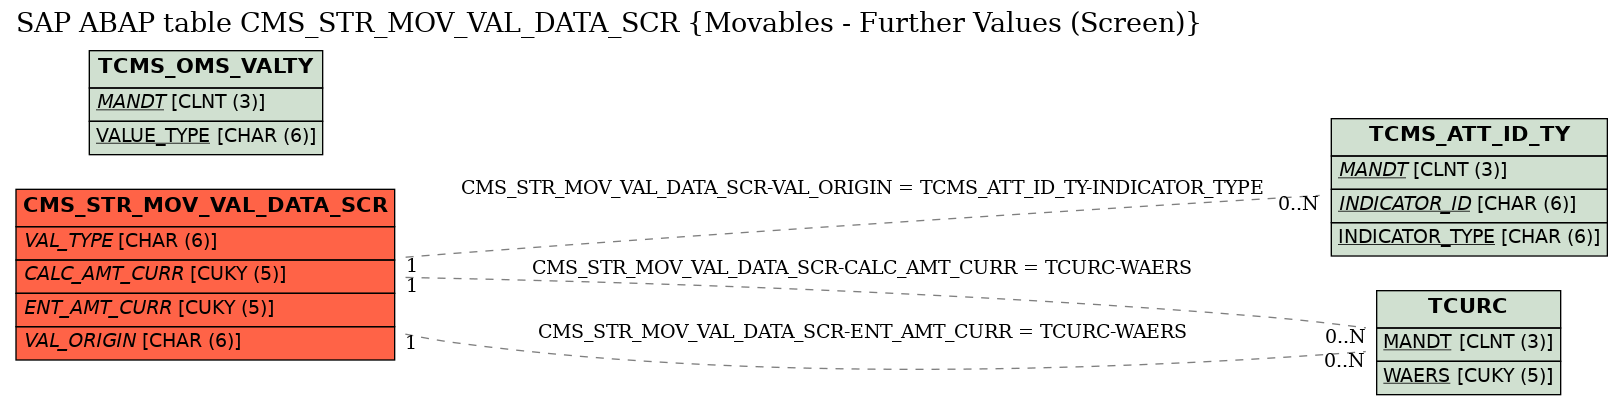 E-R Diagram for table CMS_STR_MOV_VAL_DATA_SCR (Movables - Further Values (Screen))